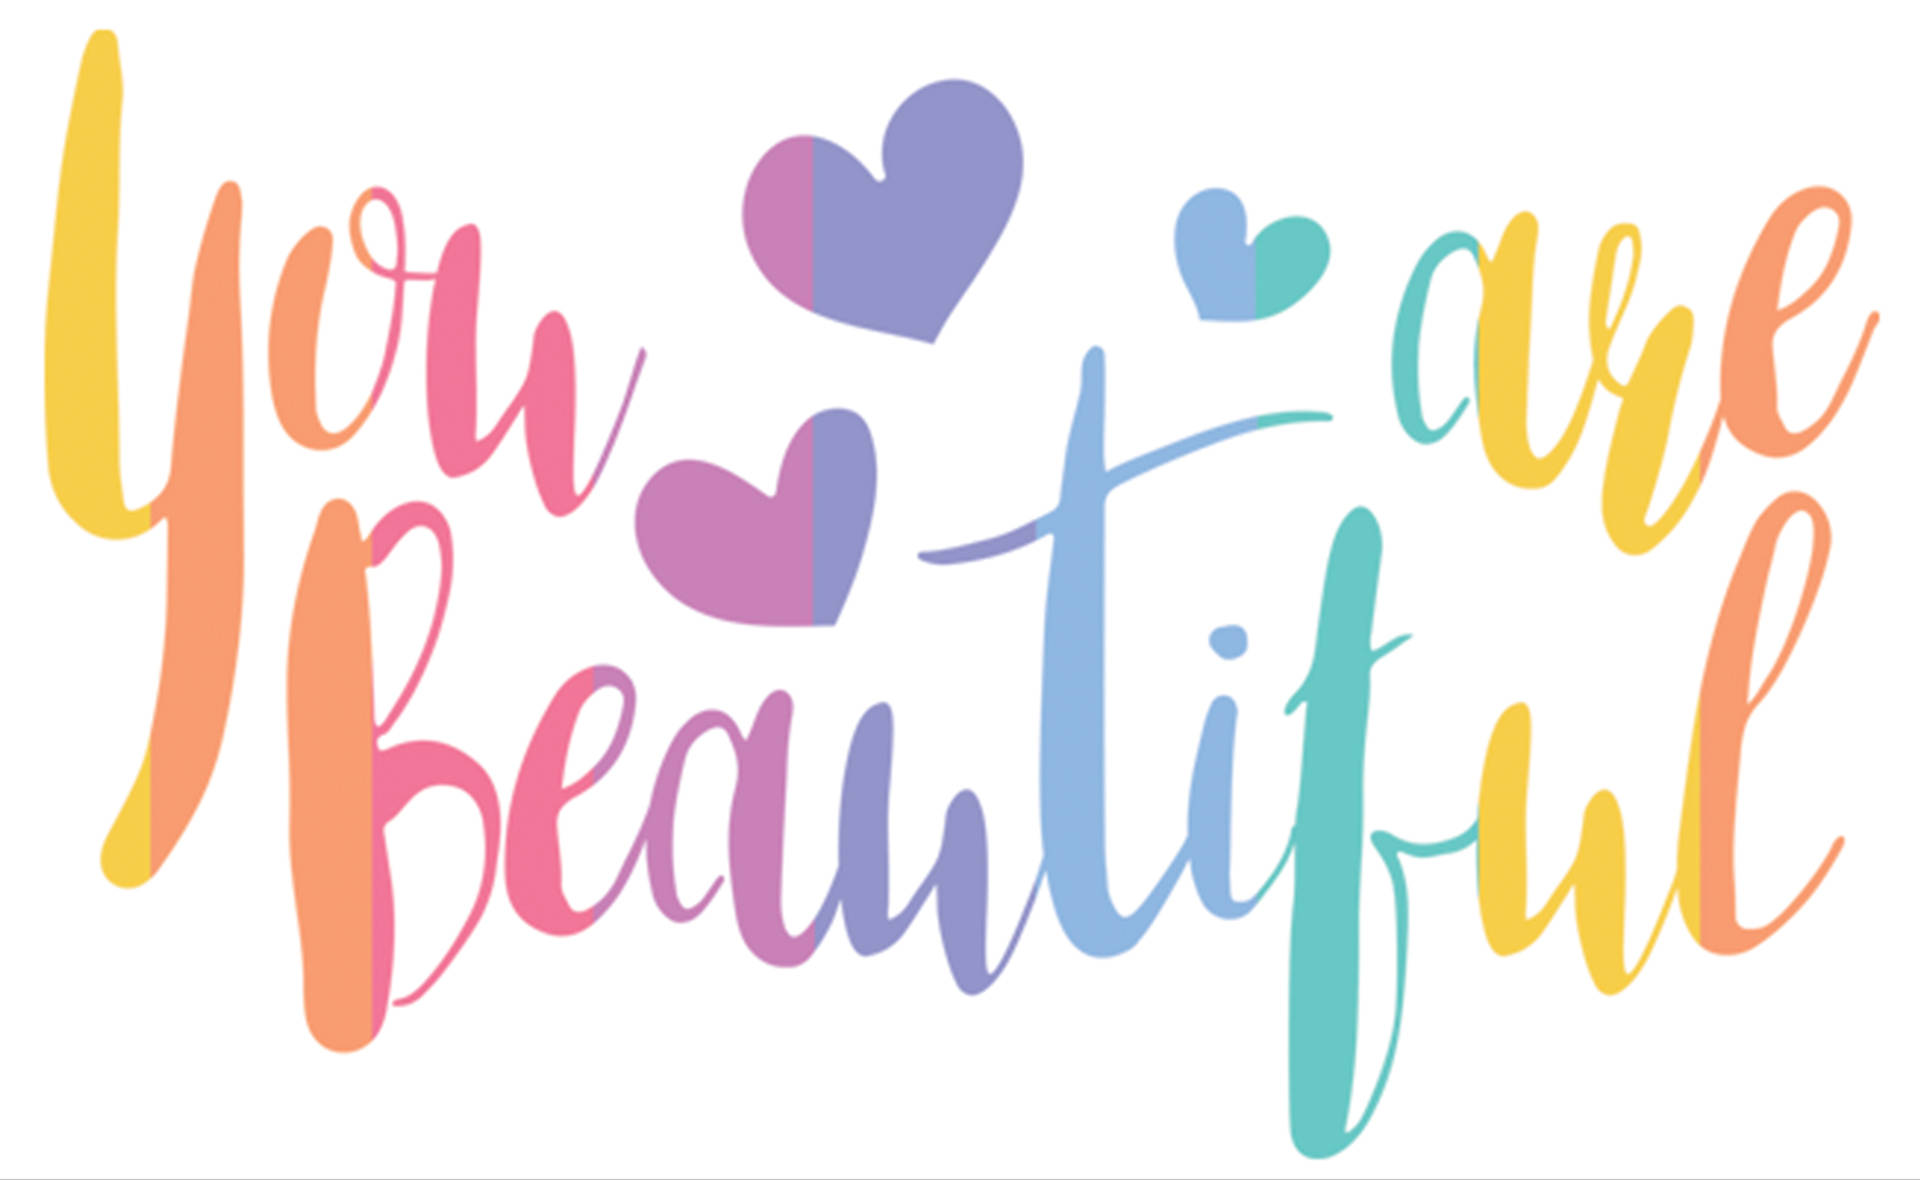 Caption: You Are Beautiful – Colorful Wall Art